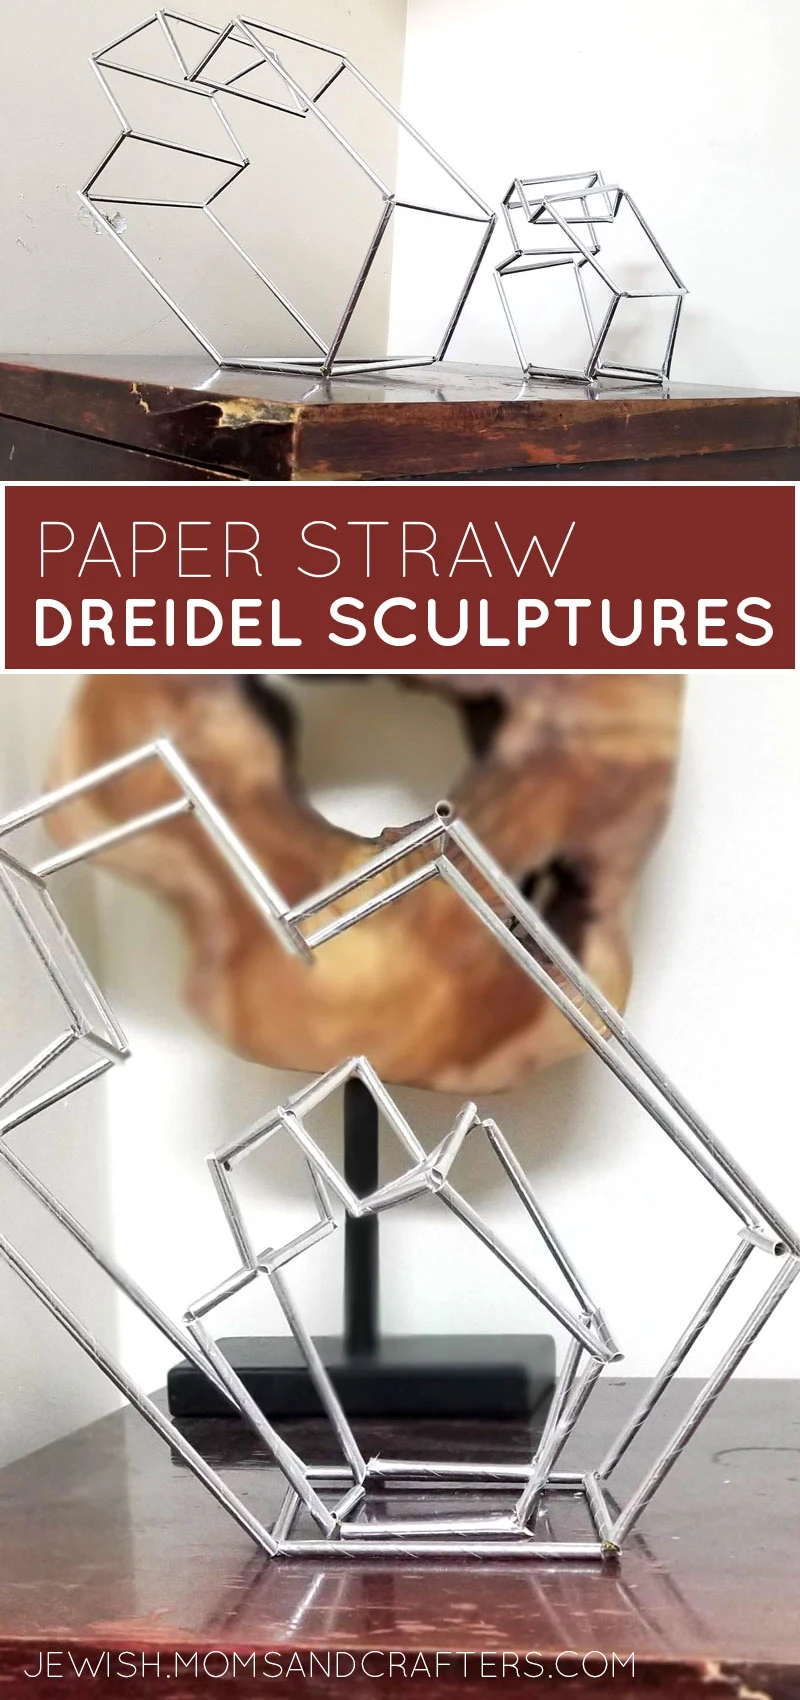 Learn how to make your own dreidel decorations using paper straws and a himmeli-inspired technique! This fun Chanukah craft for adults is a great Hanukkah party decoration for big kids or grown-ups to DIY using paper straws.